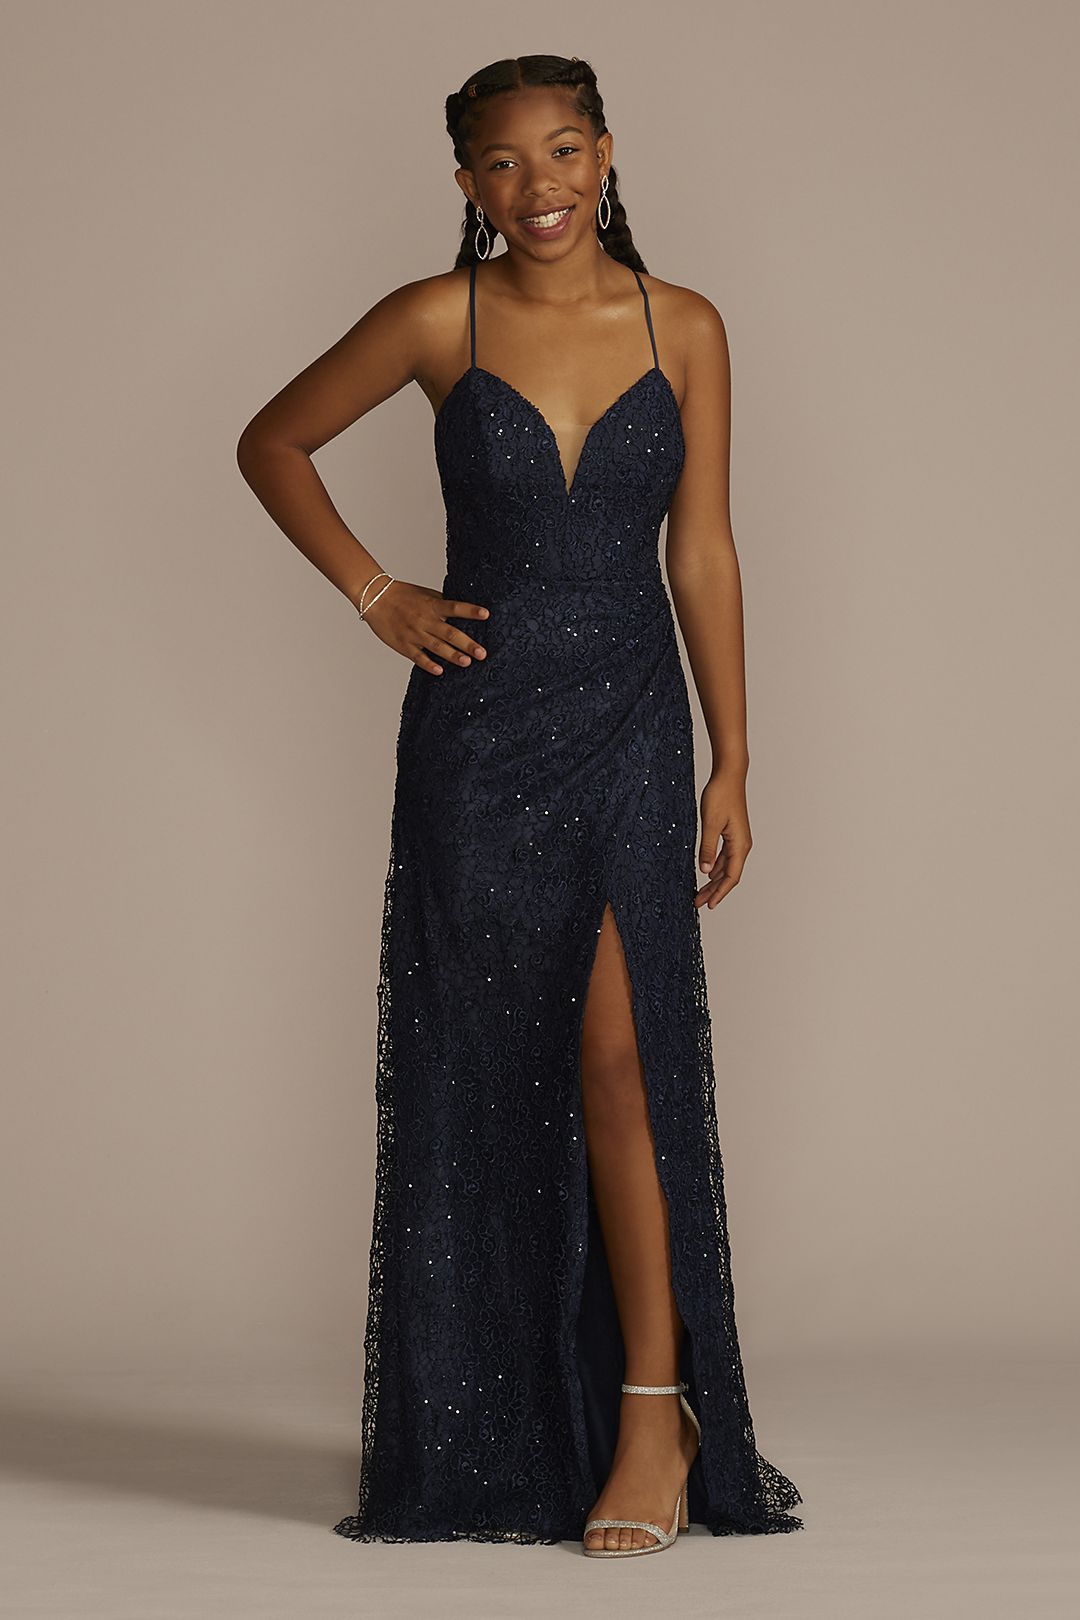 2020 Evening Gowns Trends - Ever-Pretty US